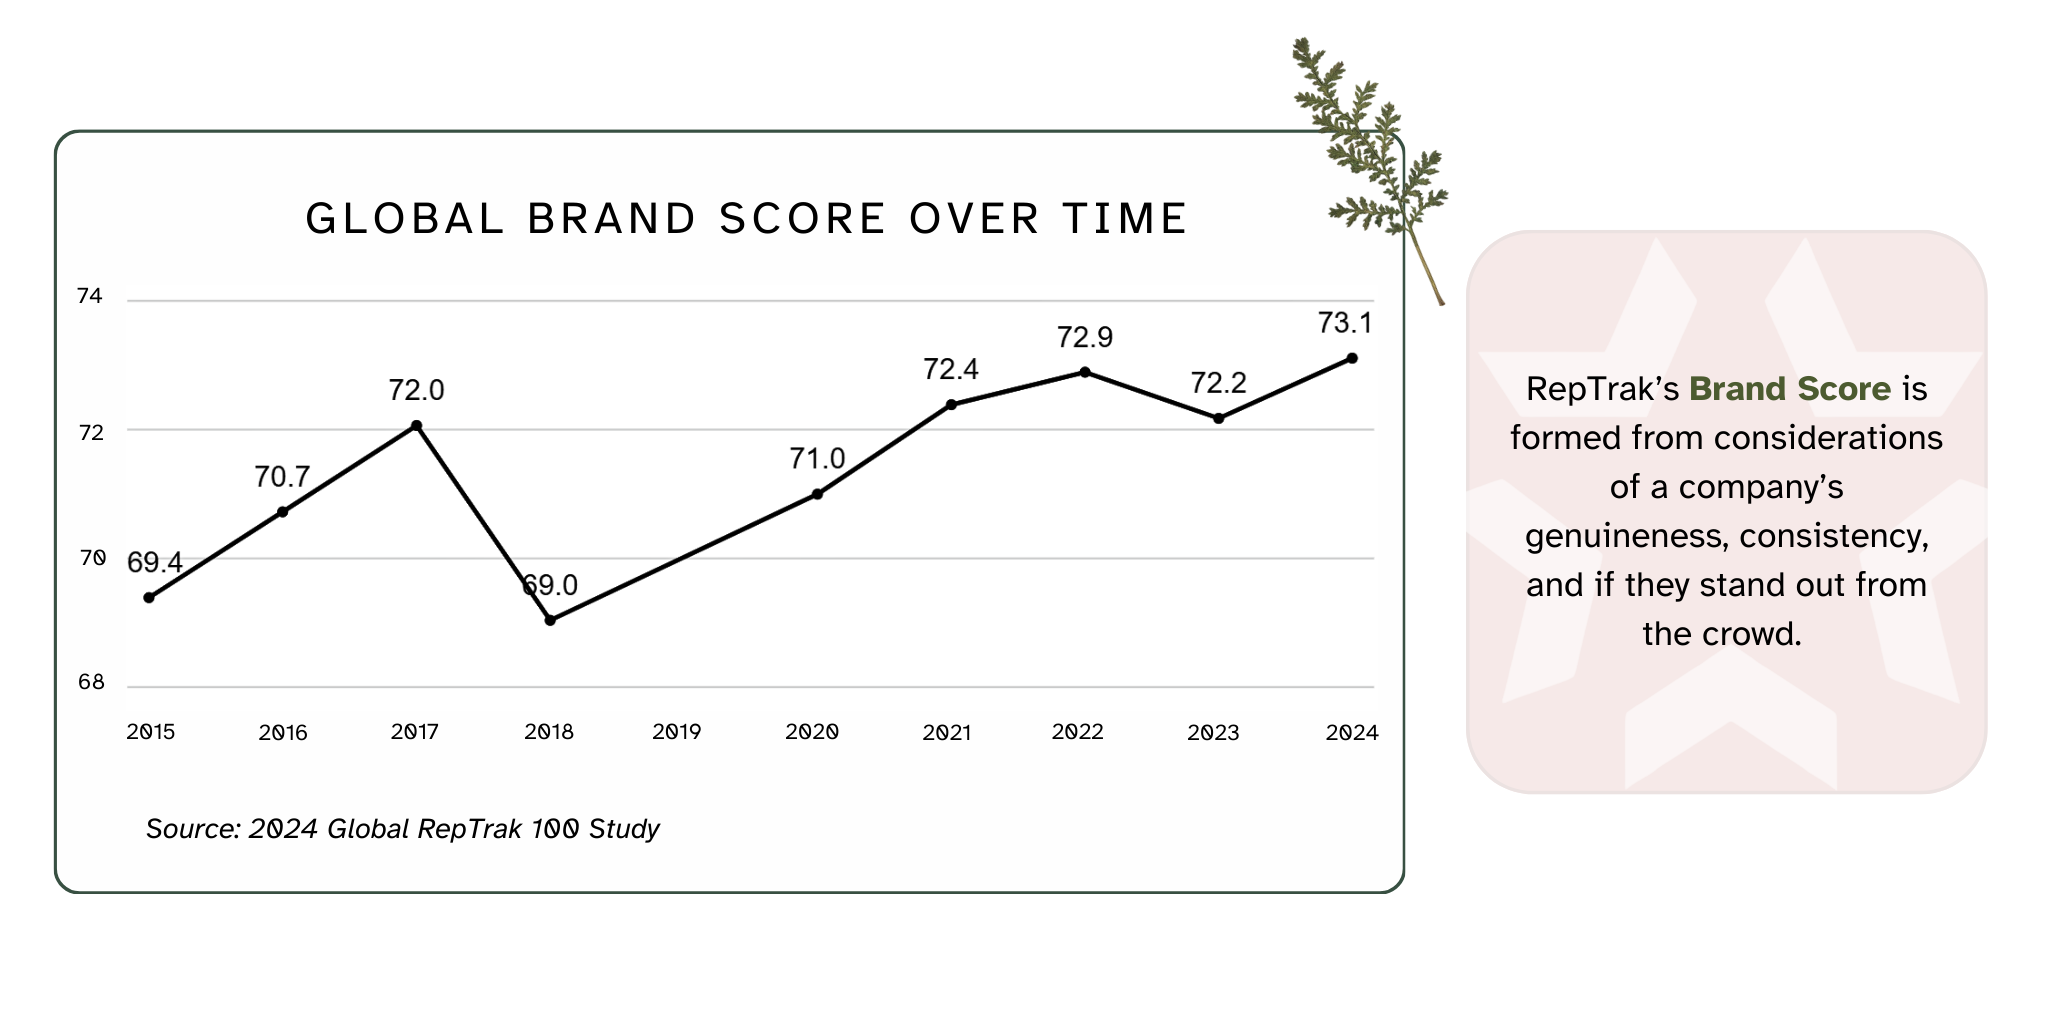 Global Brand Scores Over Time